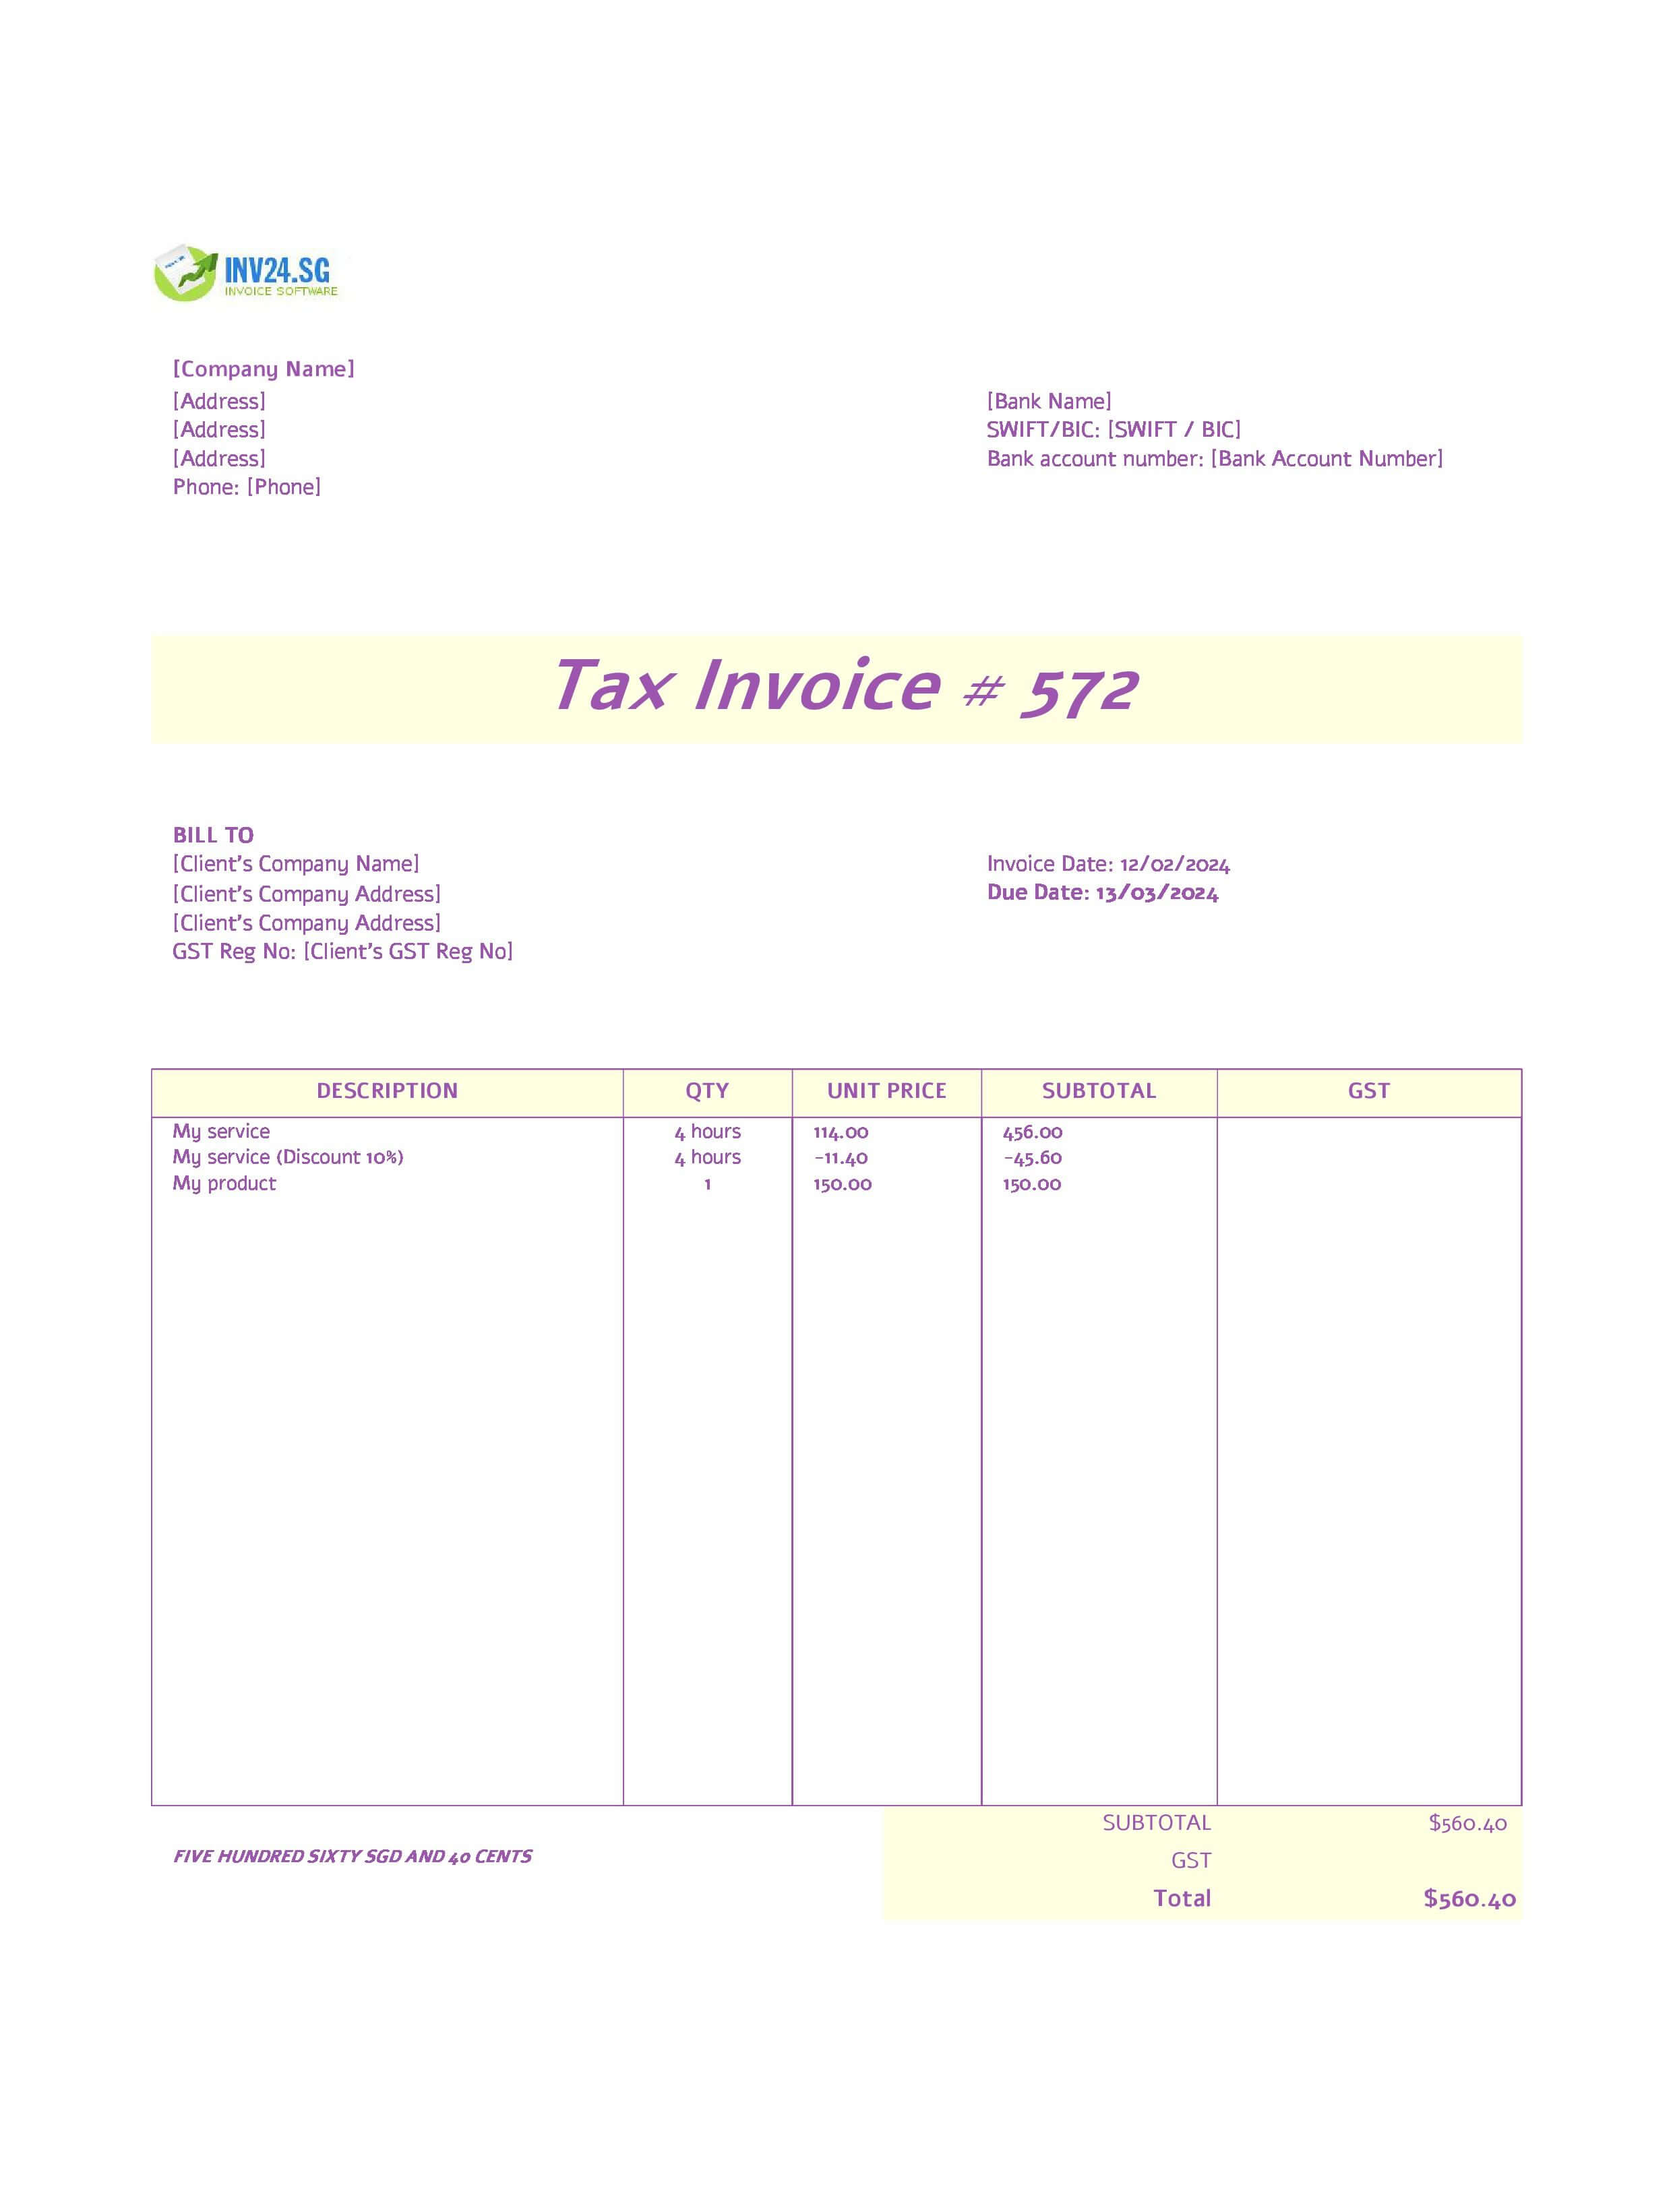 Singapore invoice template without GST